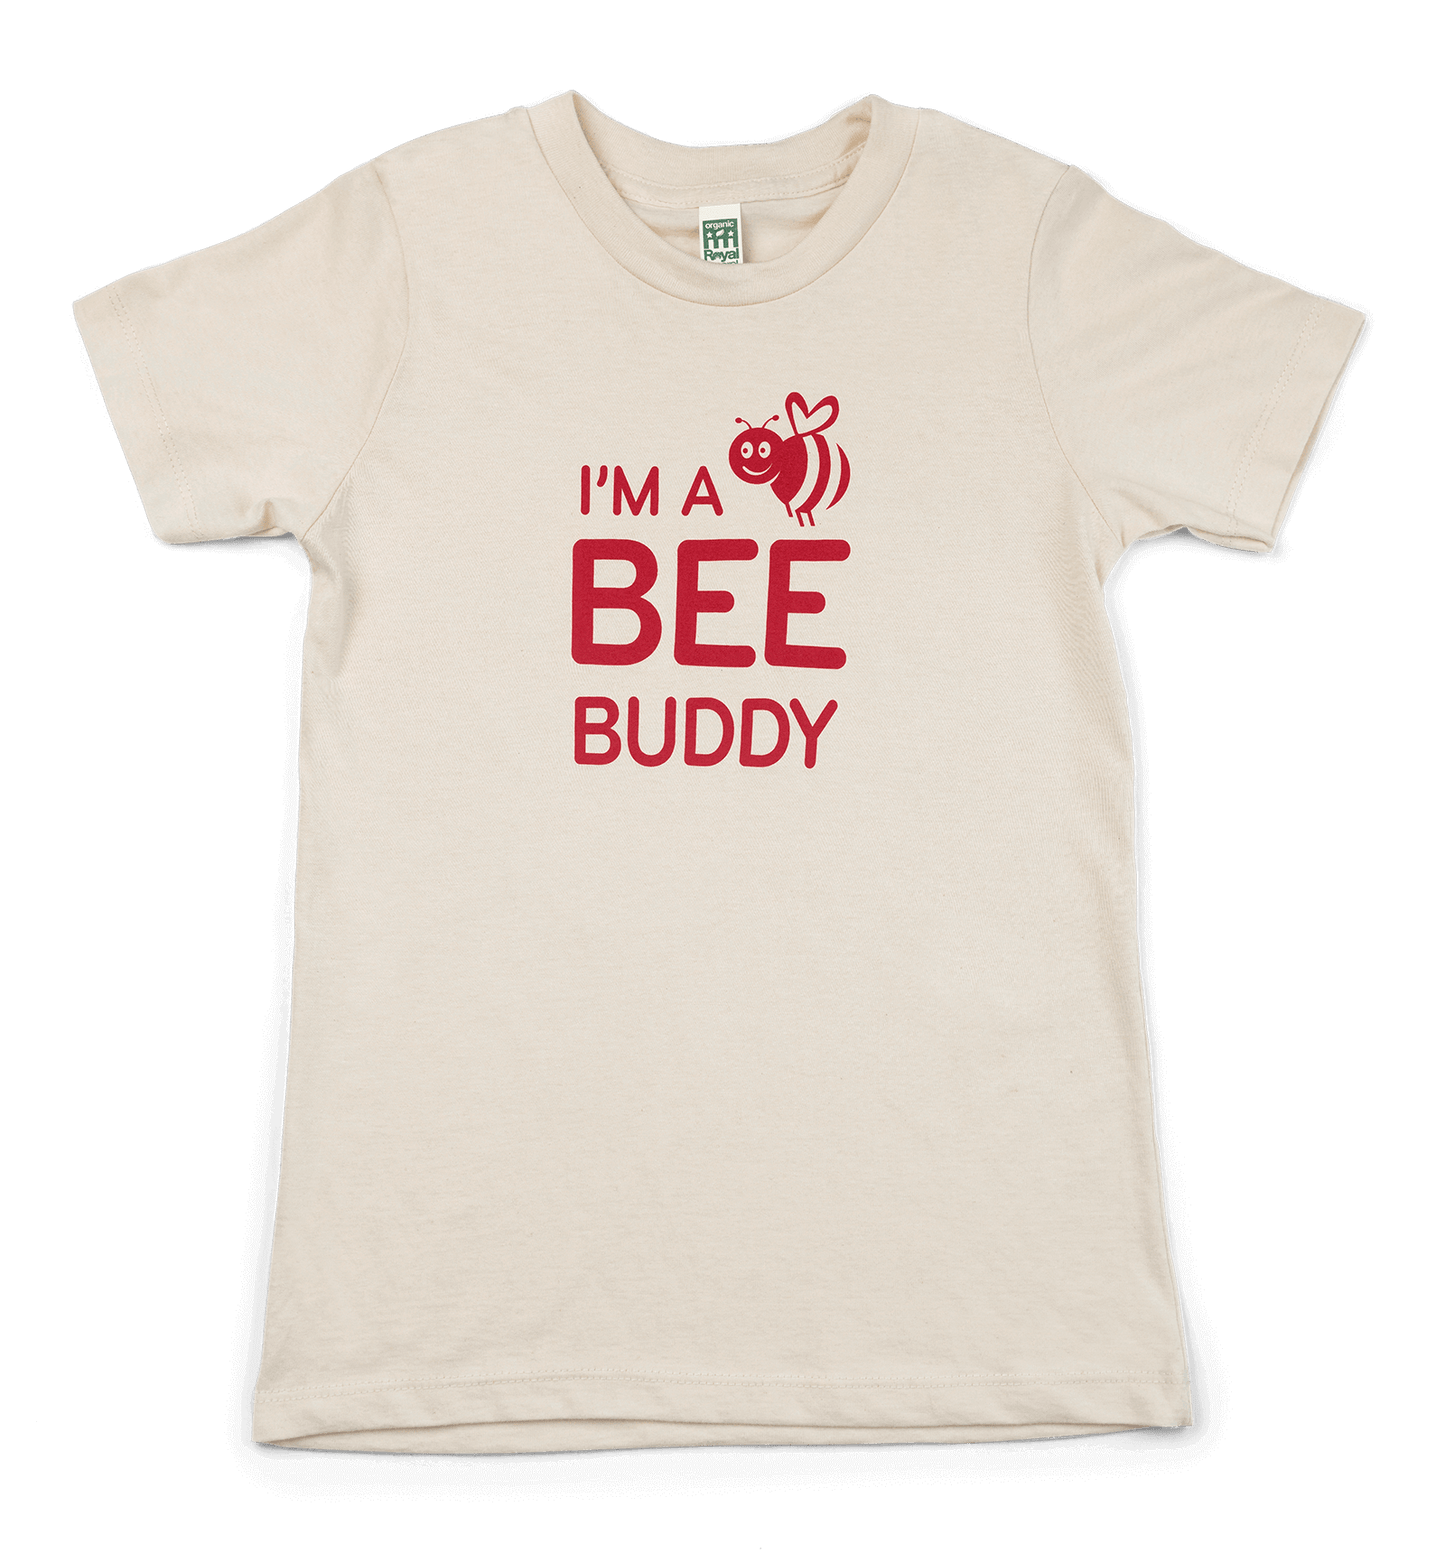 I'm a Bee Buddy Kids T-shirt with Bee Icon